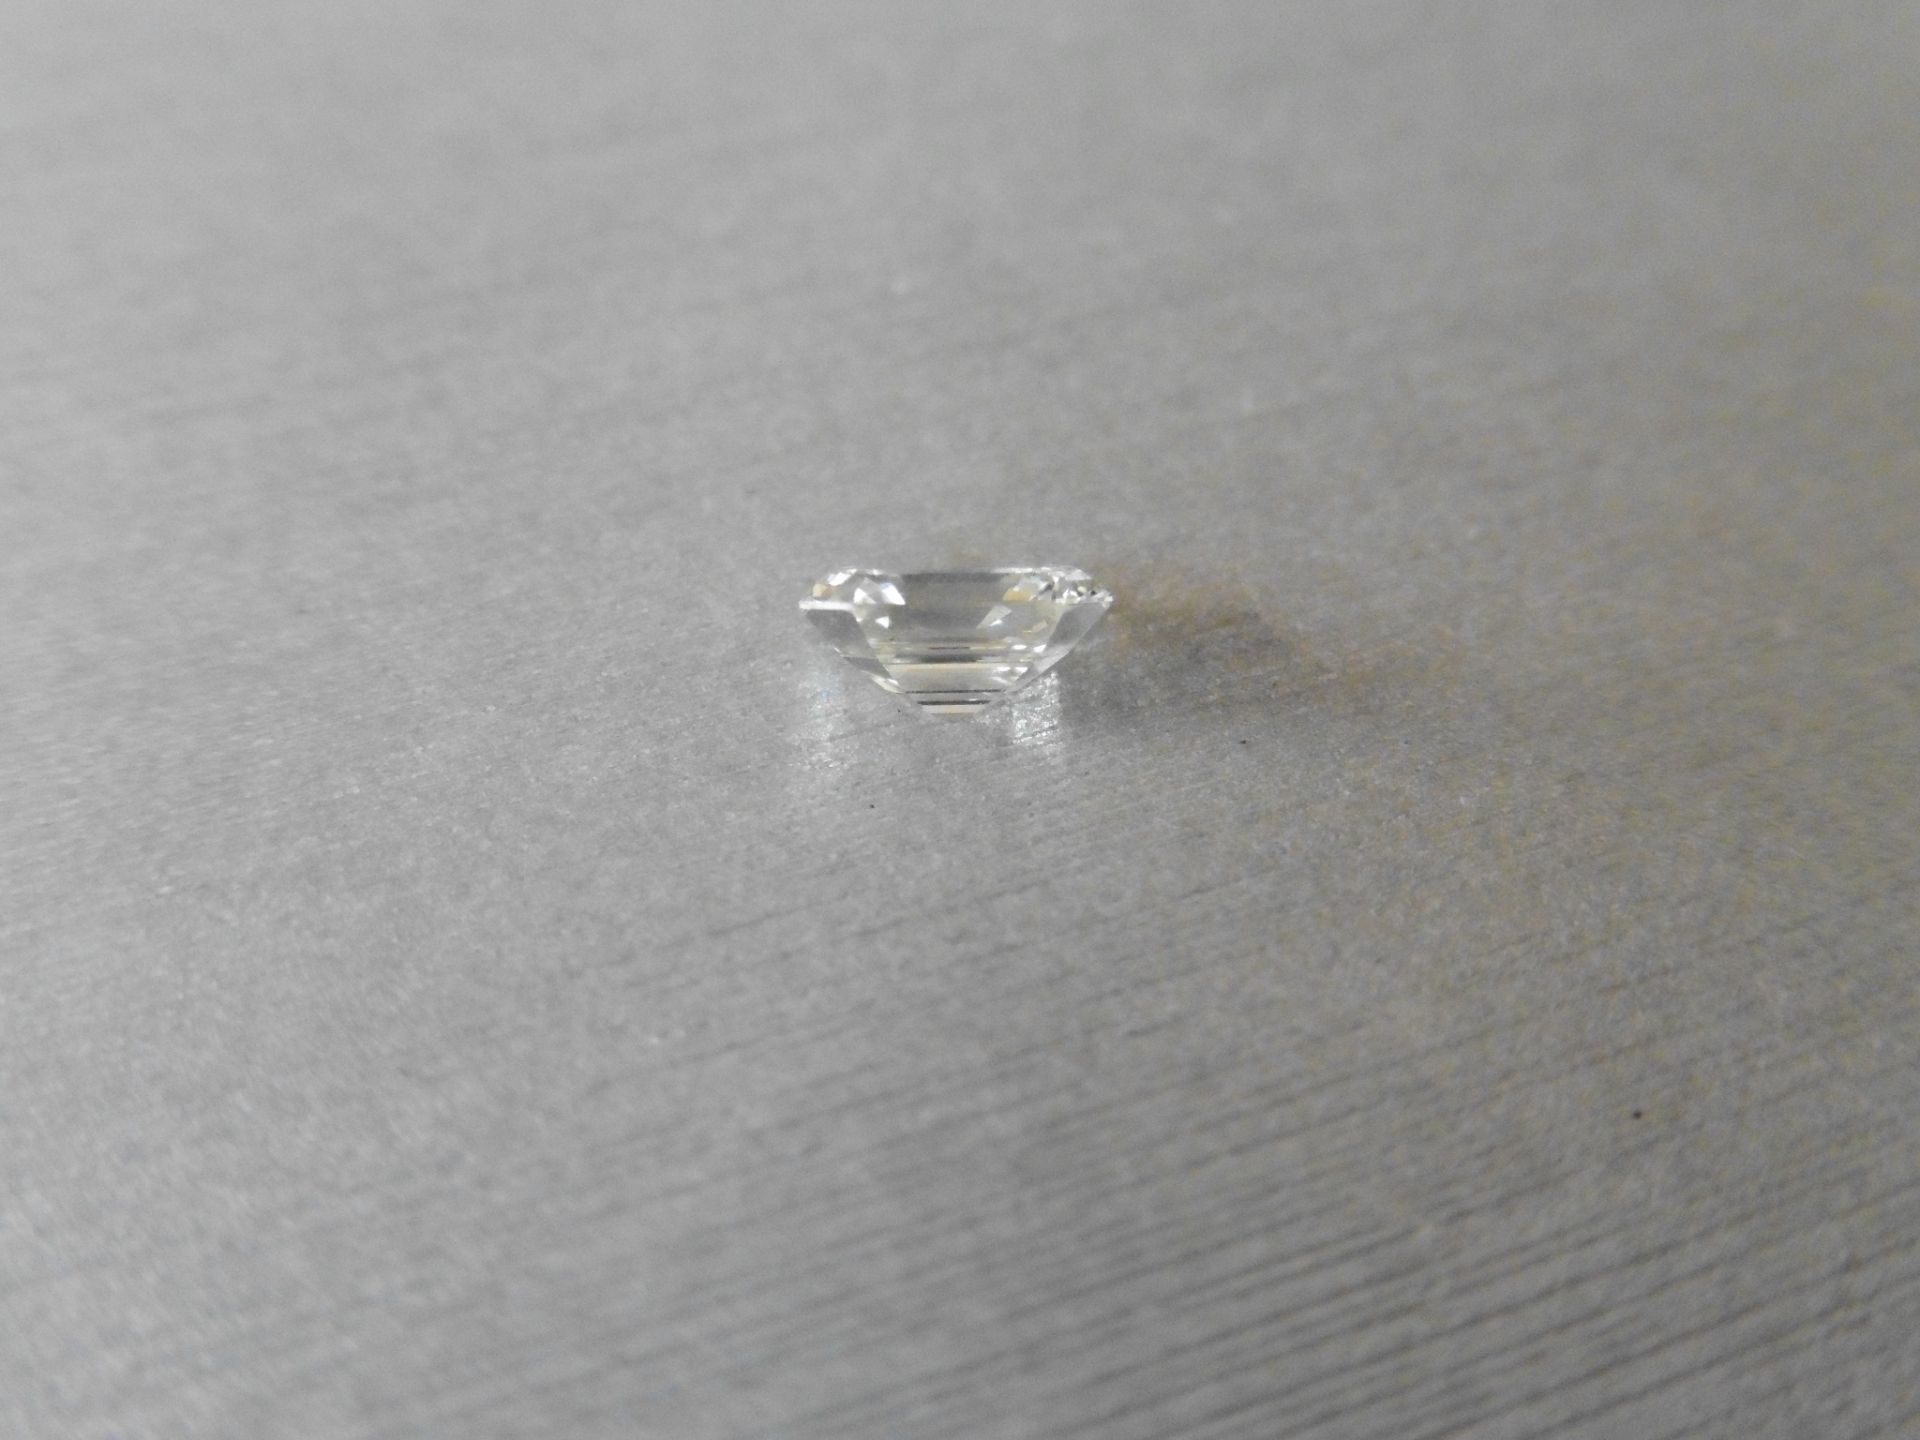 0.92ct single radiant cut diamond. Measures 6.00 x 5.3mm. J colour and VVS clarity. Valued at £6950. - Image 3 of 5